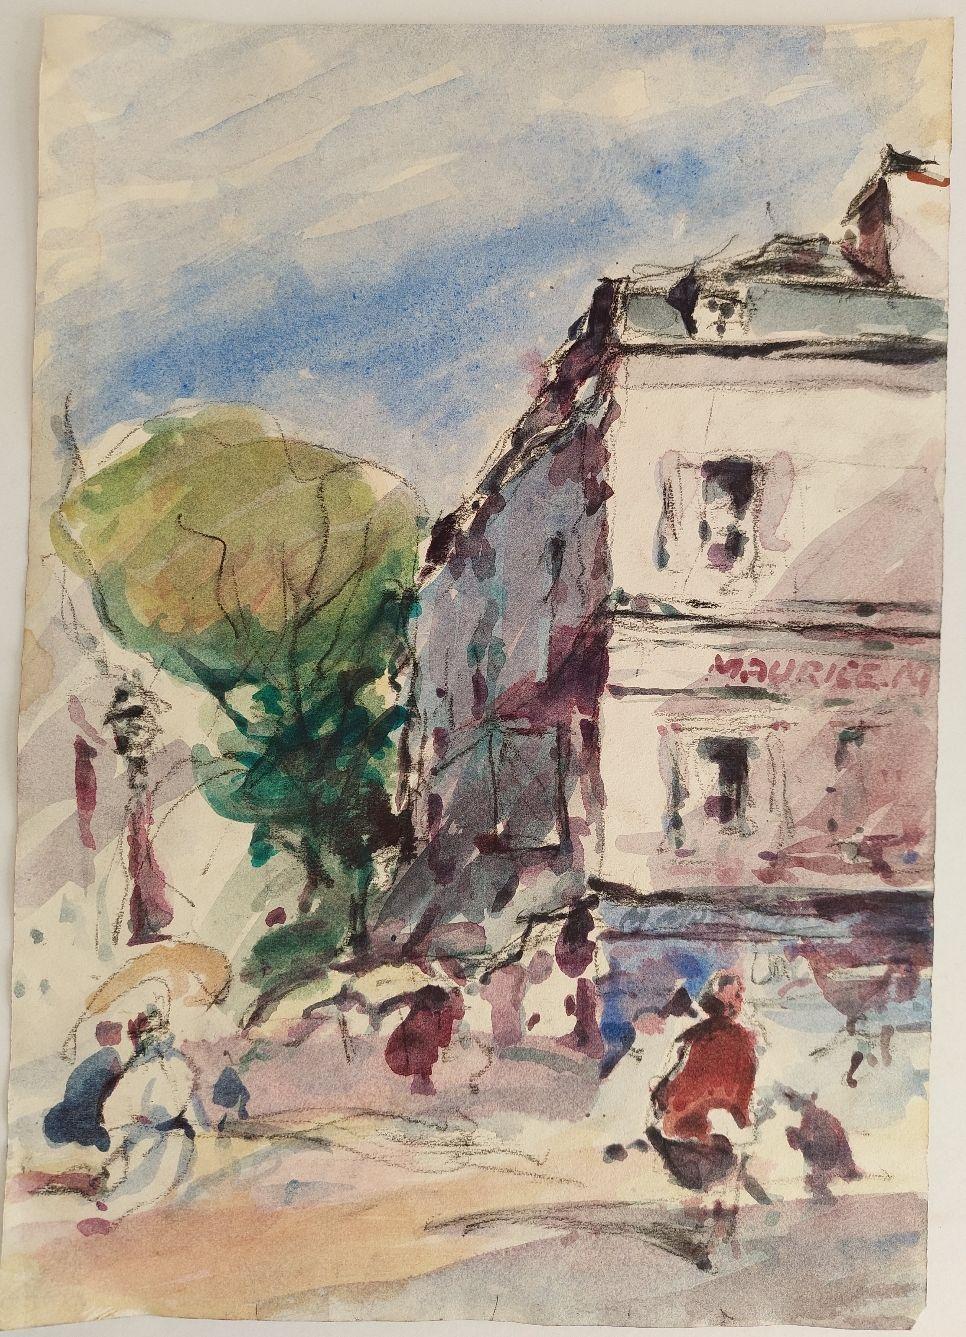 Figures in a Parisian street.
By Maurice Mazeilie (French, 1924-2021).
Watercolor painting on artist paper, unframed.
Signed to the centre right on the building.
Stamped verso.

Measures: painting: 17.75 inches x 12.5 inches.

A delightful